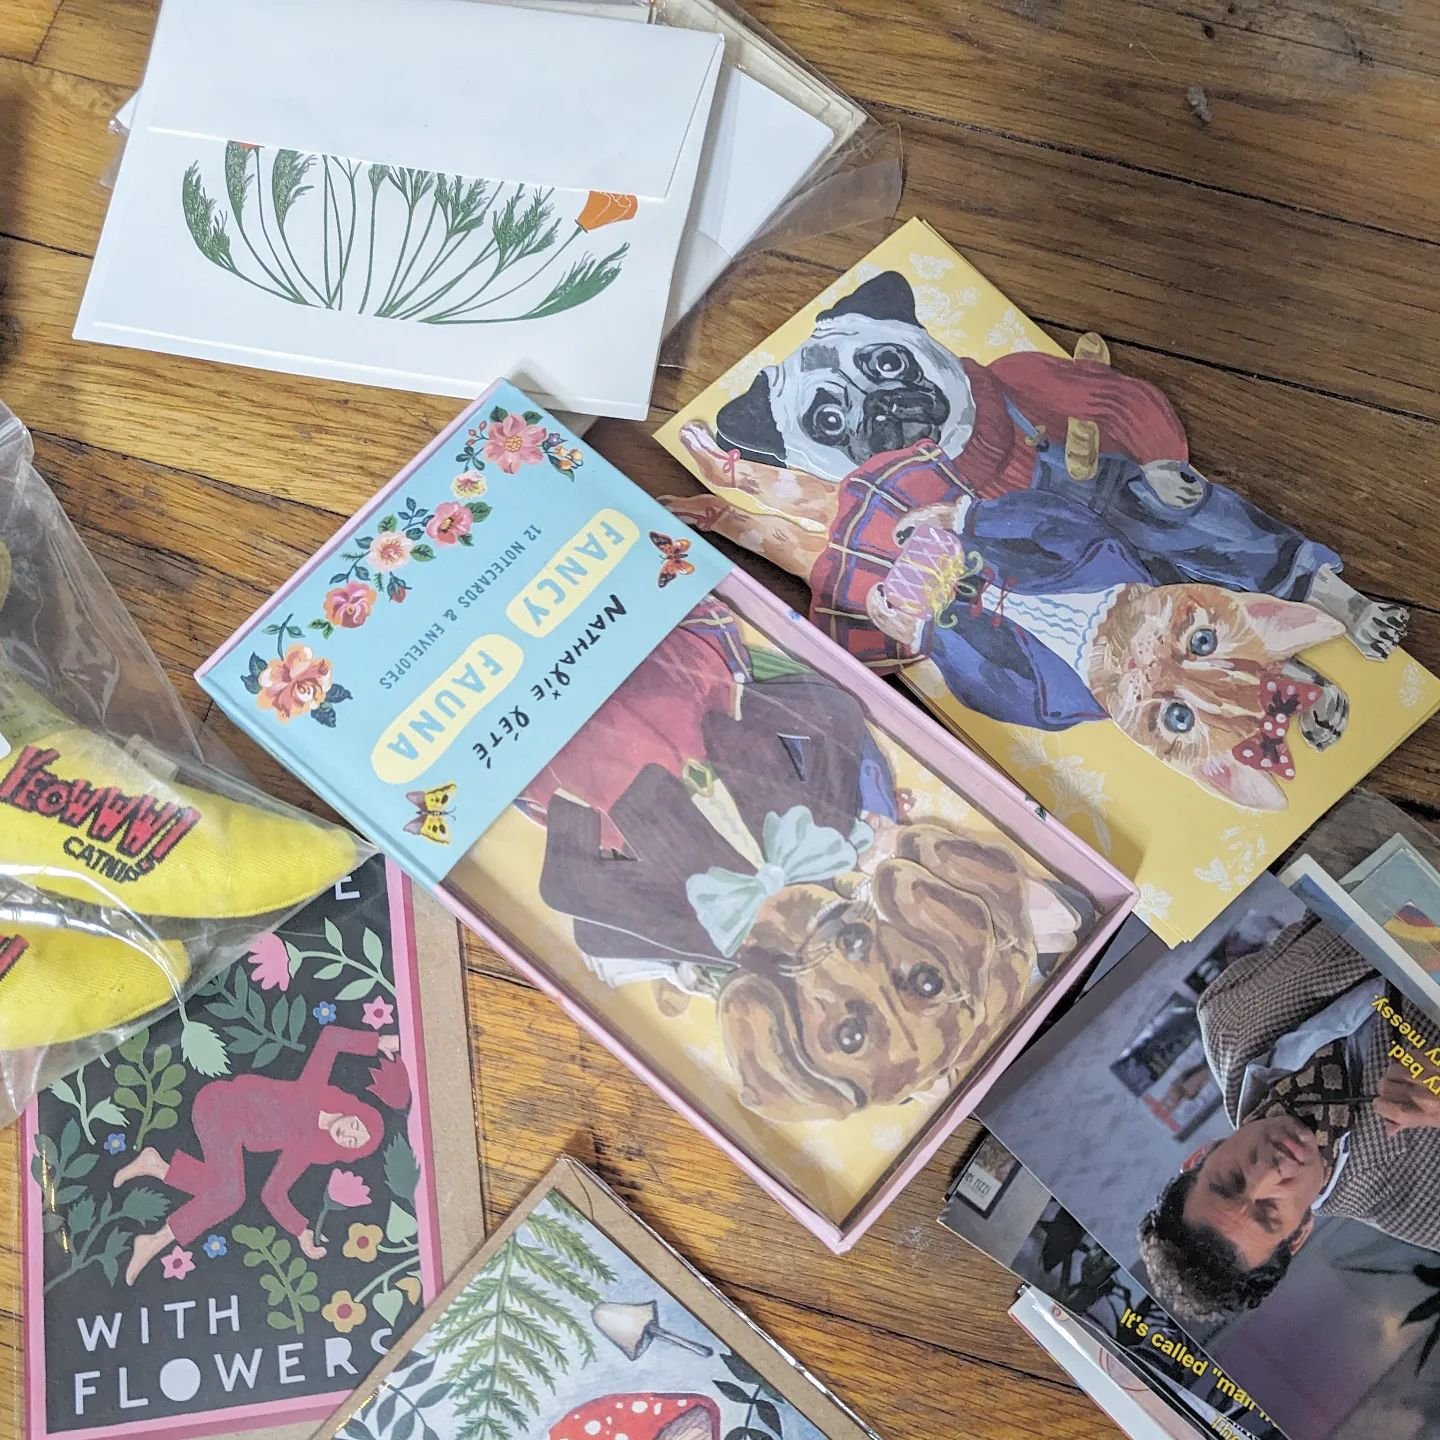 Sorting through gorgeous card collections with one of my sweet clients! Such cute designs 🫶🏾 I'm a firm believer in keeping the useful things you love. If they're disorganized, let's streamline them and find a home for them to live their best lives